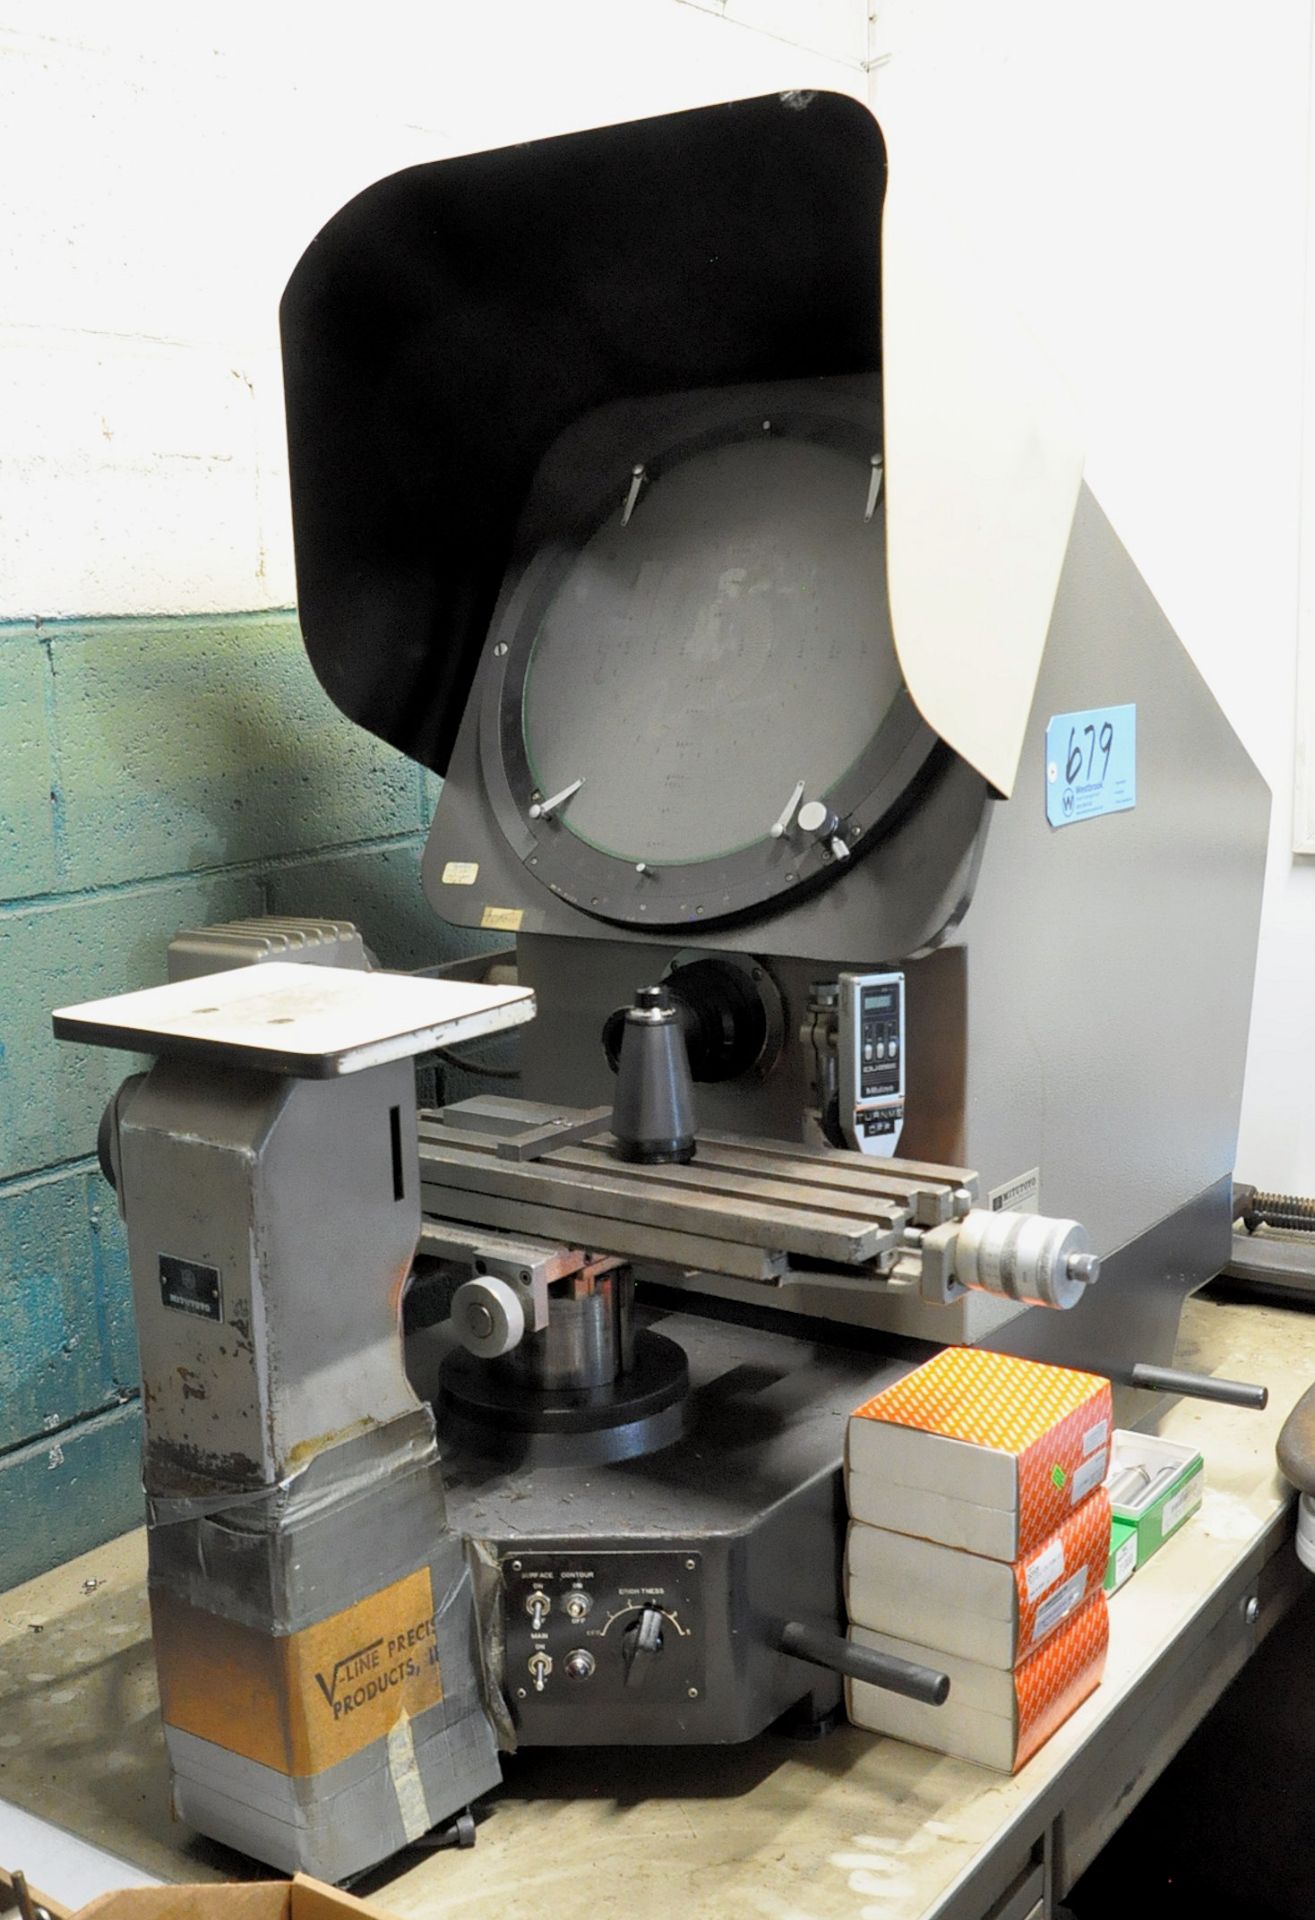 Mitutoyo Model PH-350, 14" Optical Comparator, with Accessories and Desk